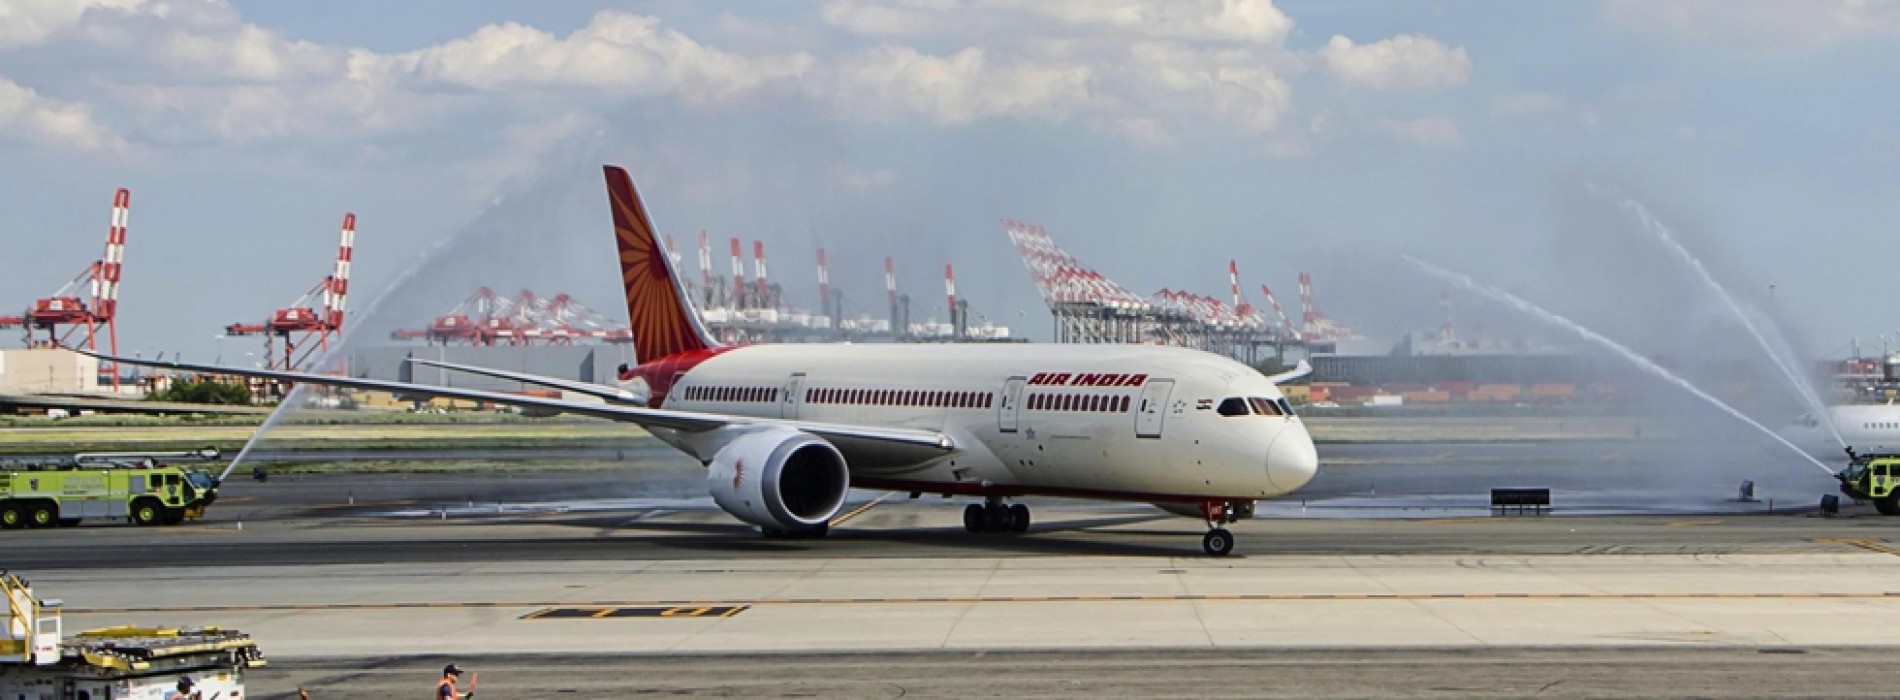 FDI in Air India means no preferential treatment to it: Aviation minister